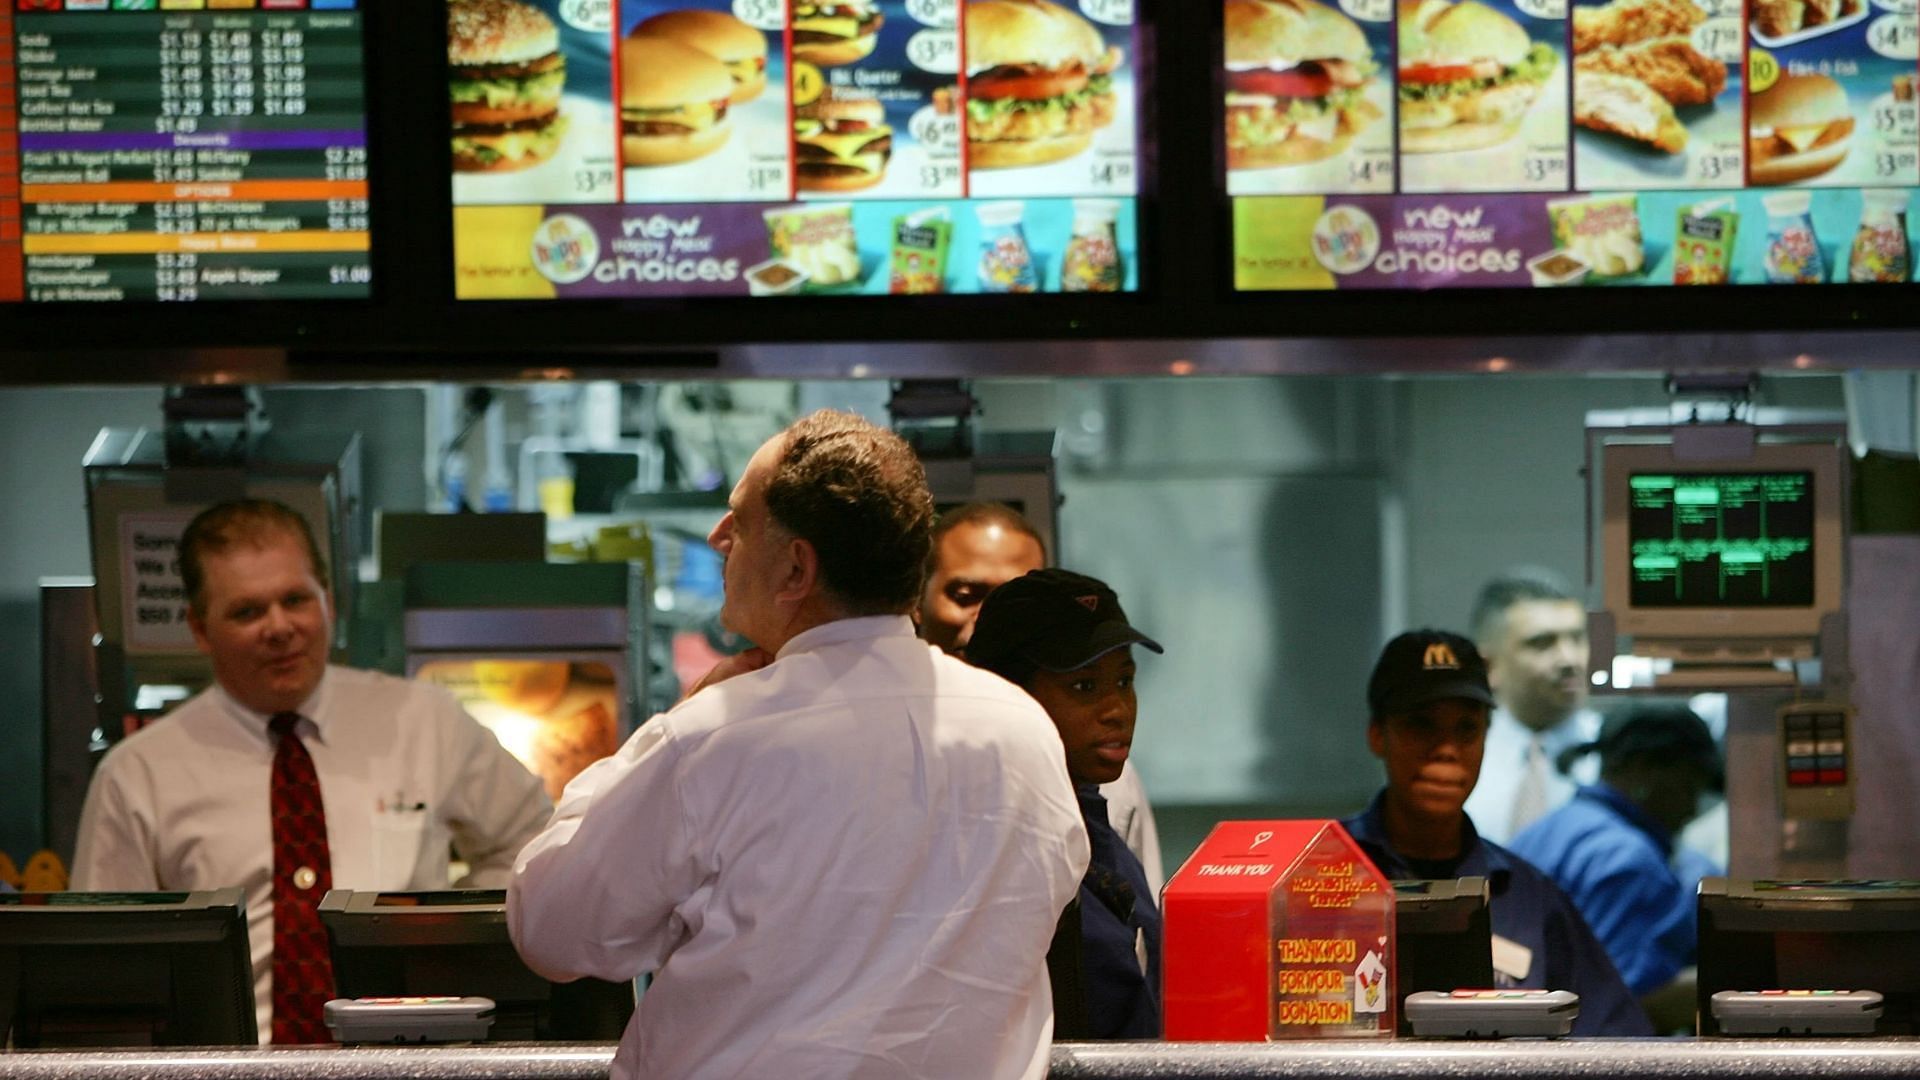 Workers taking the order of a customer at a fast food restaurant (Image via Spencer Platt/Getty Images)